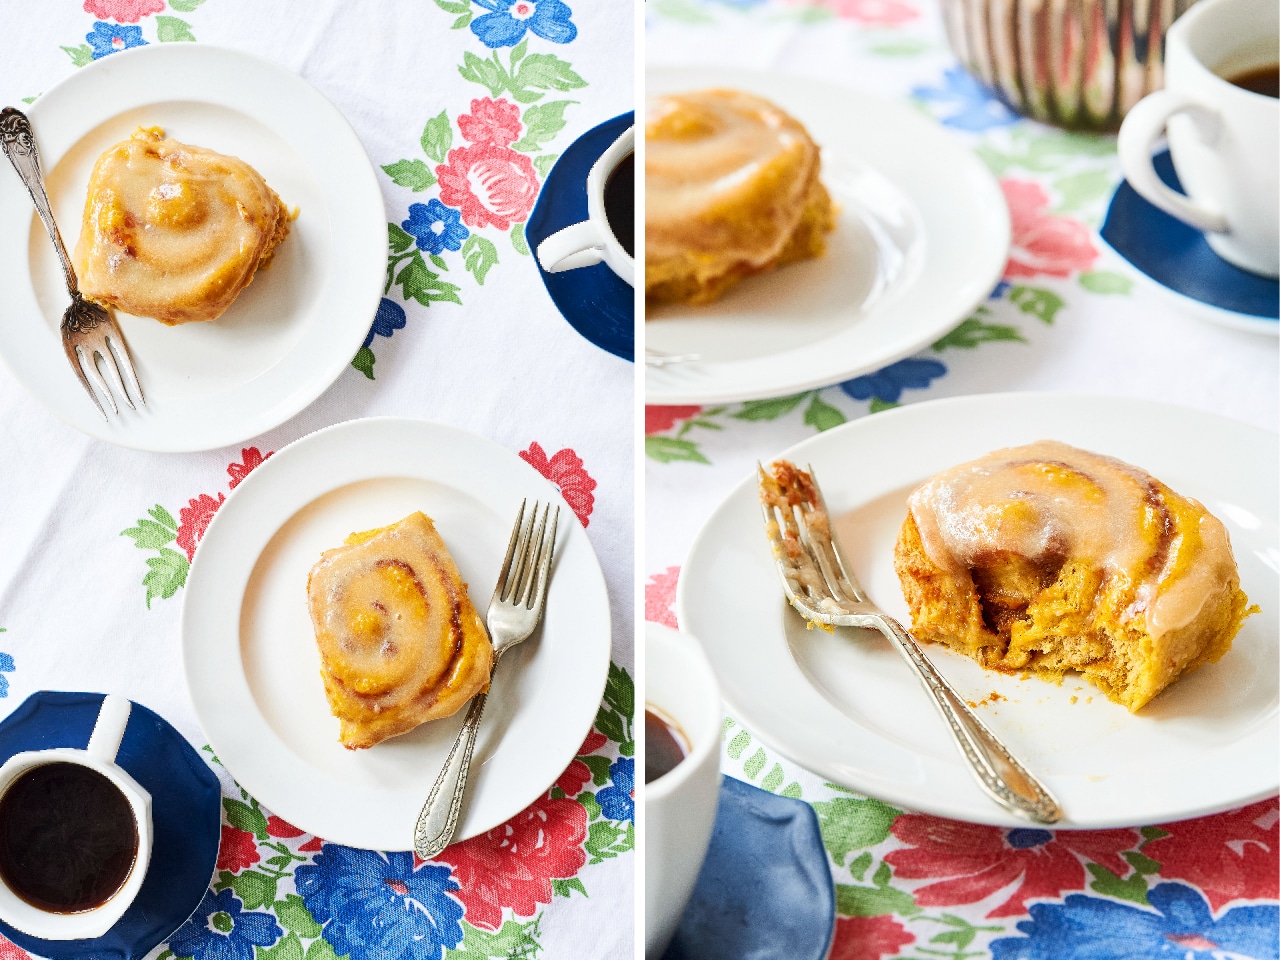 A side-by-side photo. On the left, two cinnamon rolls are served on white plates. They are topped with cream cheese glaze. On the right, one of the finished cinnamon rolls has a bite taken out of it, showing the pumpkin butter swirl.